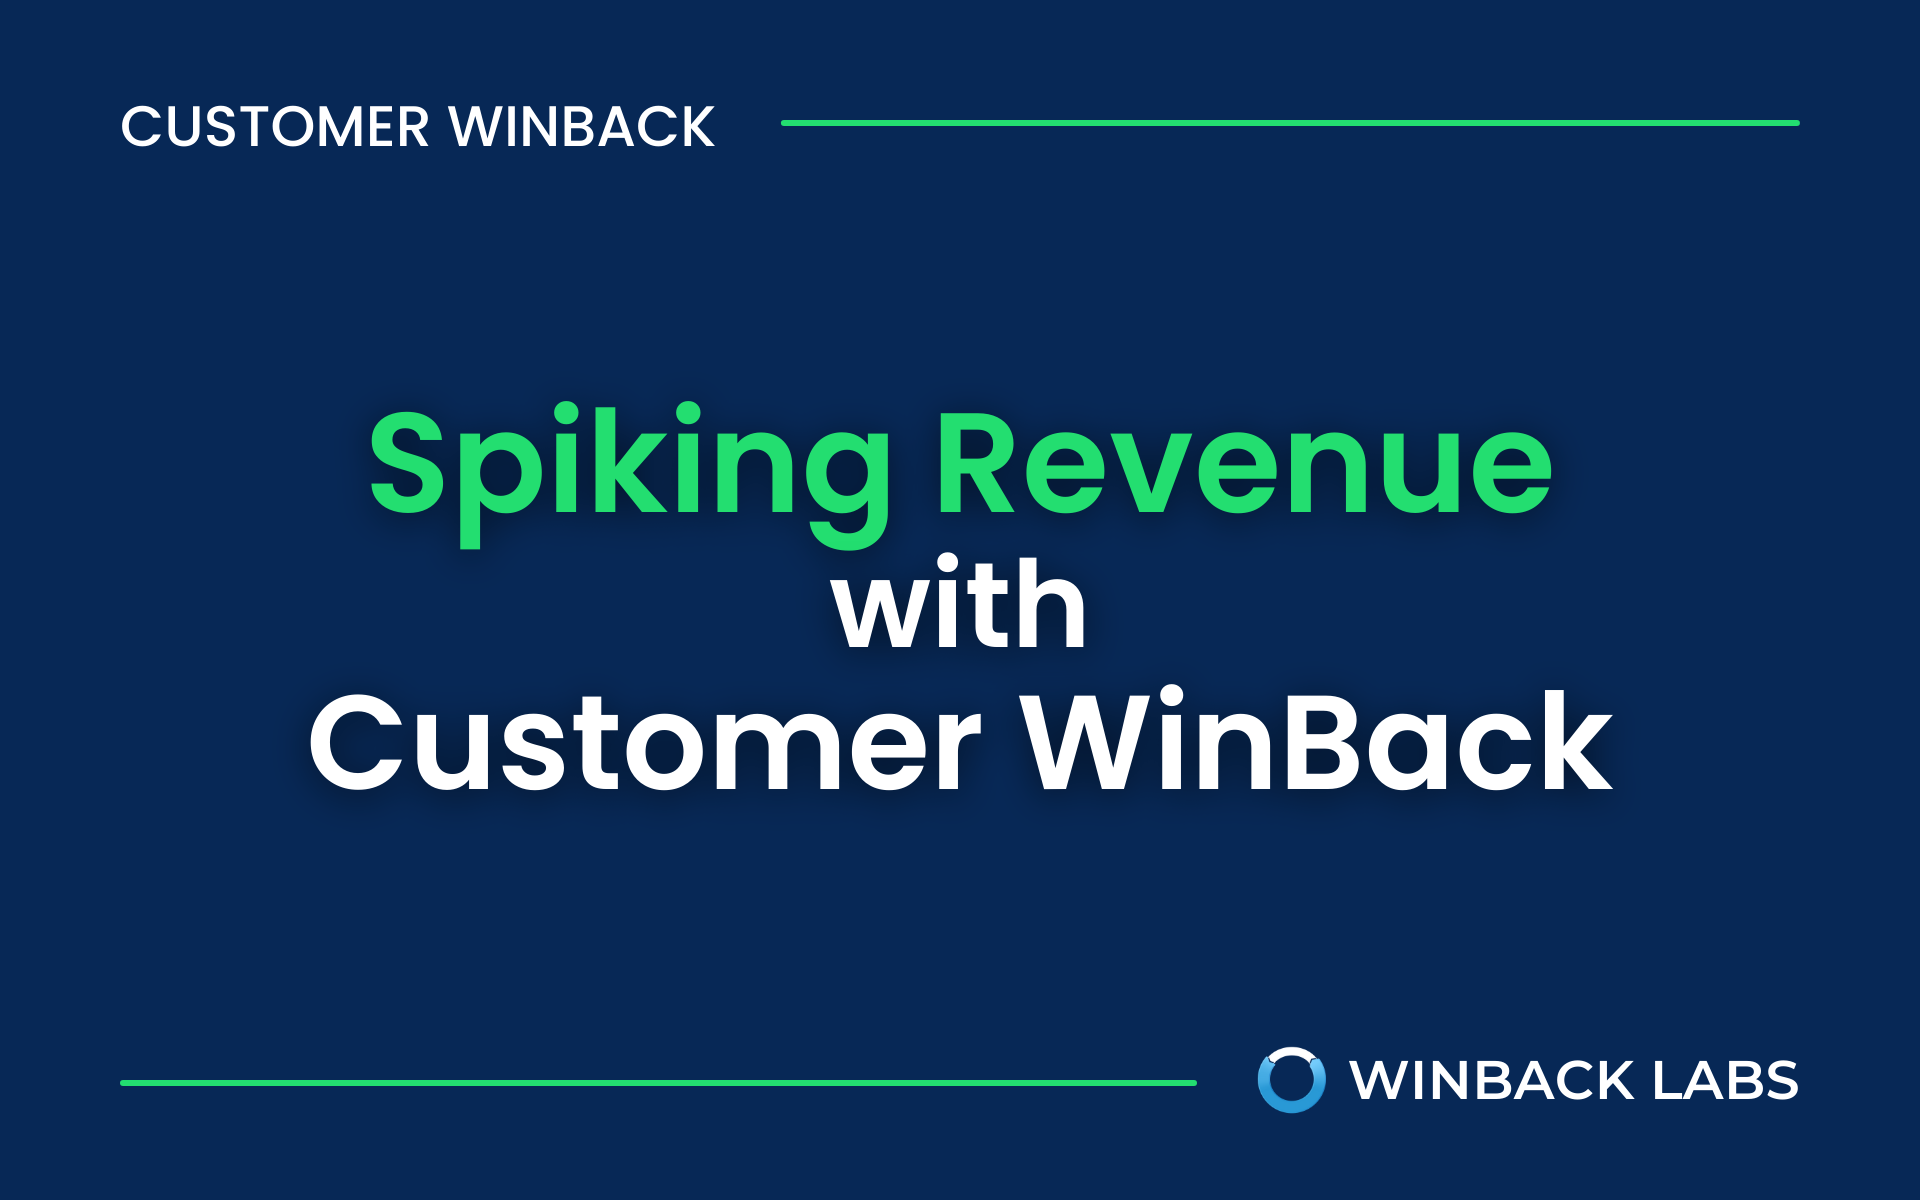 Spiking Revenue with Customer Winback